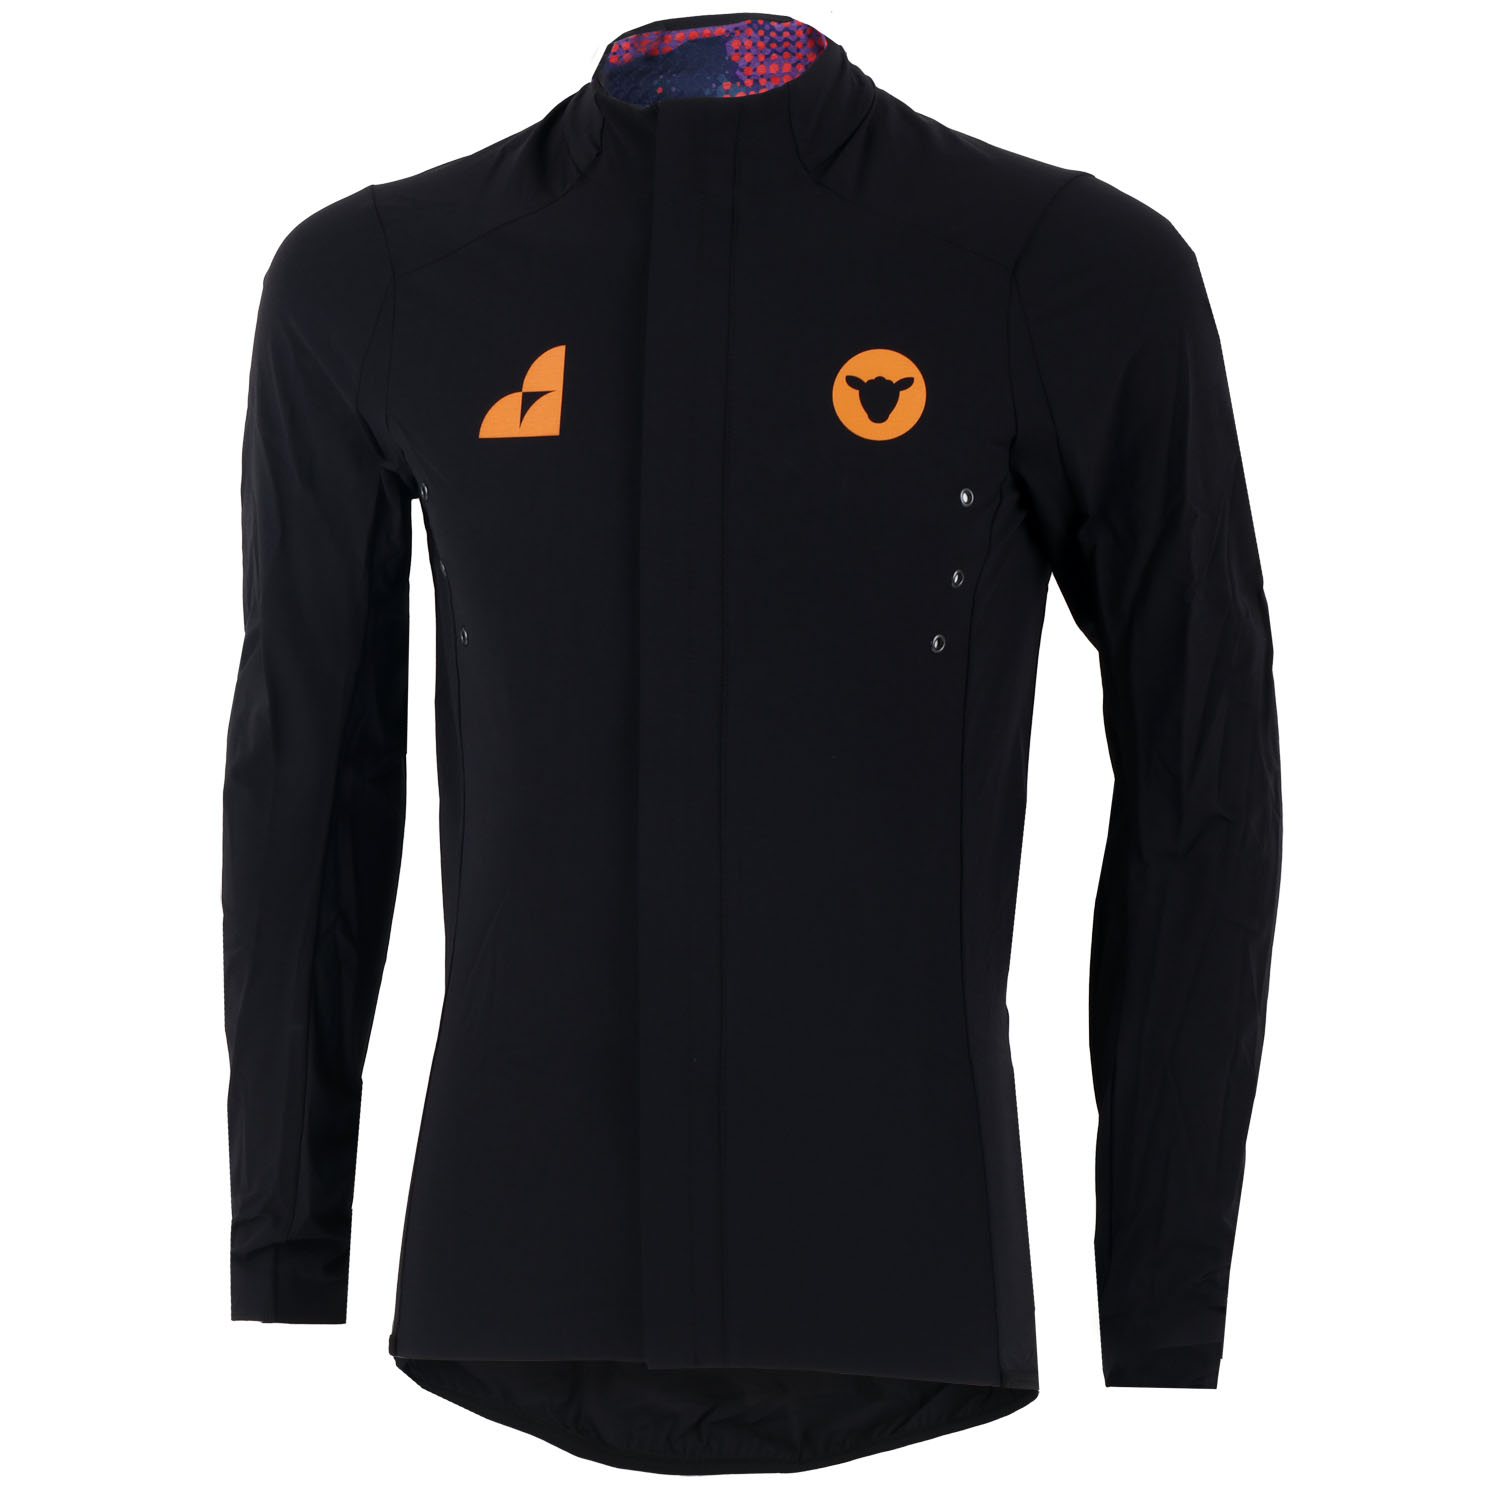 Picture of Black Sheep Cycling LTD Queens Micro Jacket - Spain